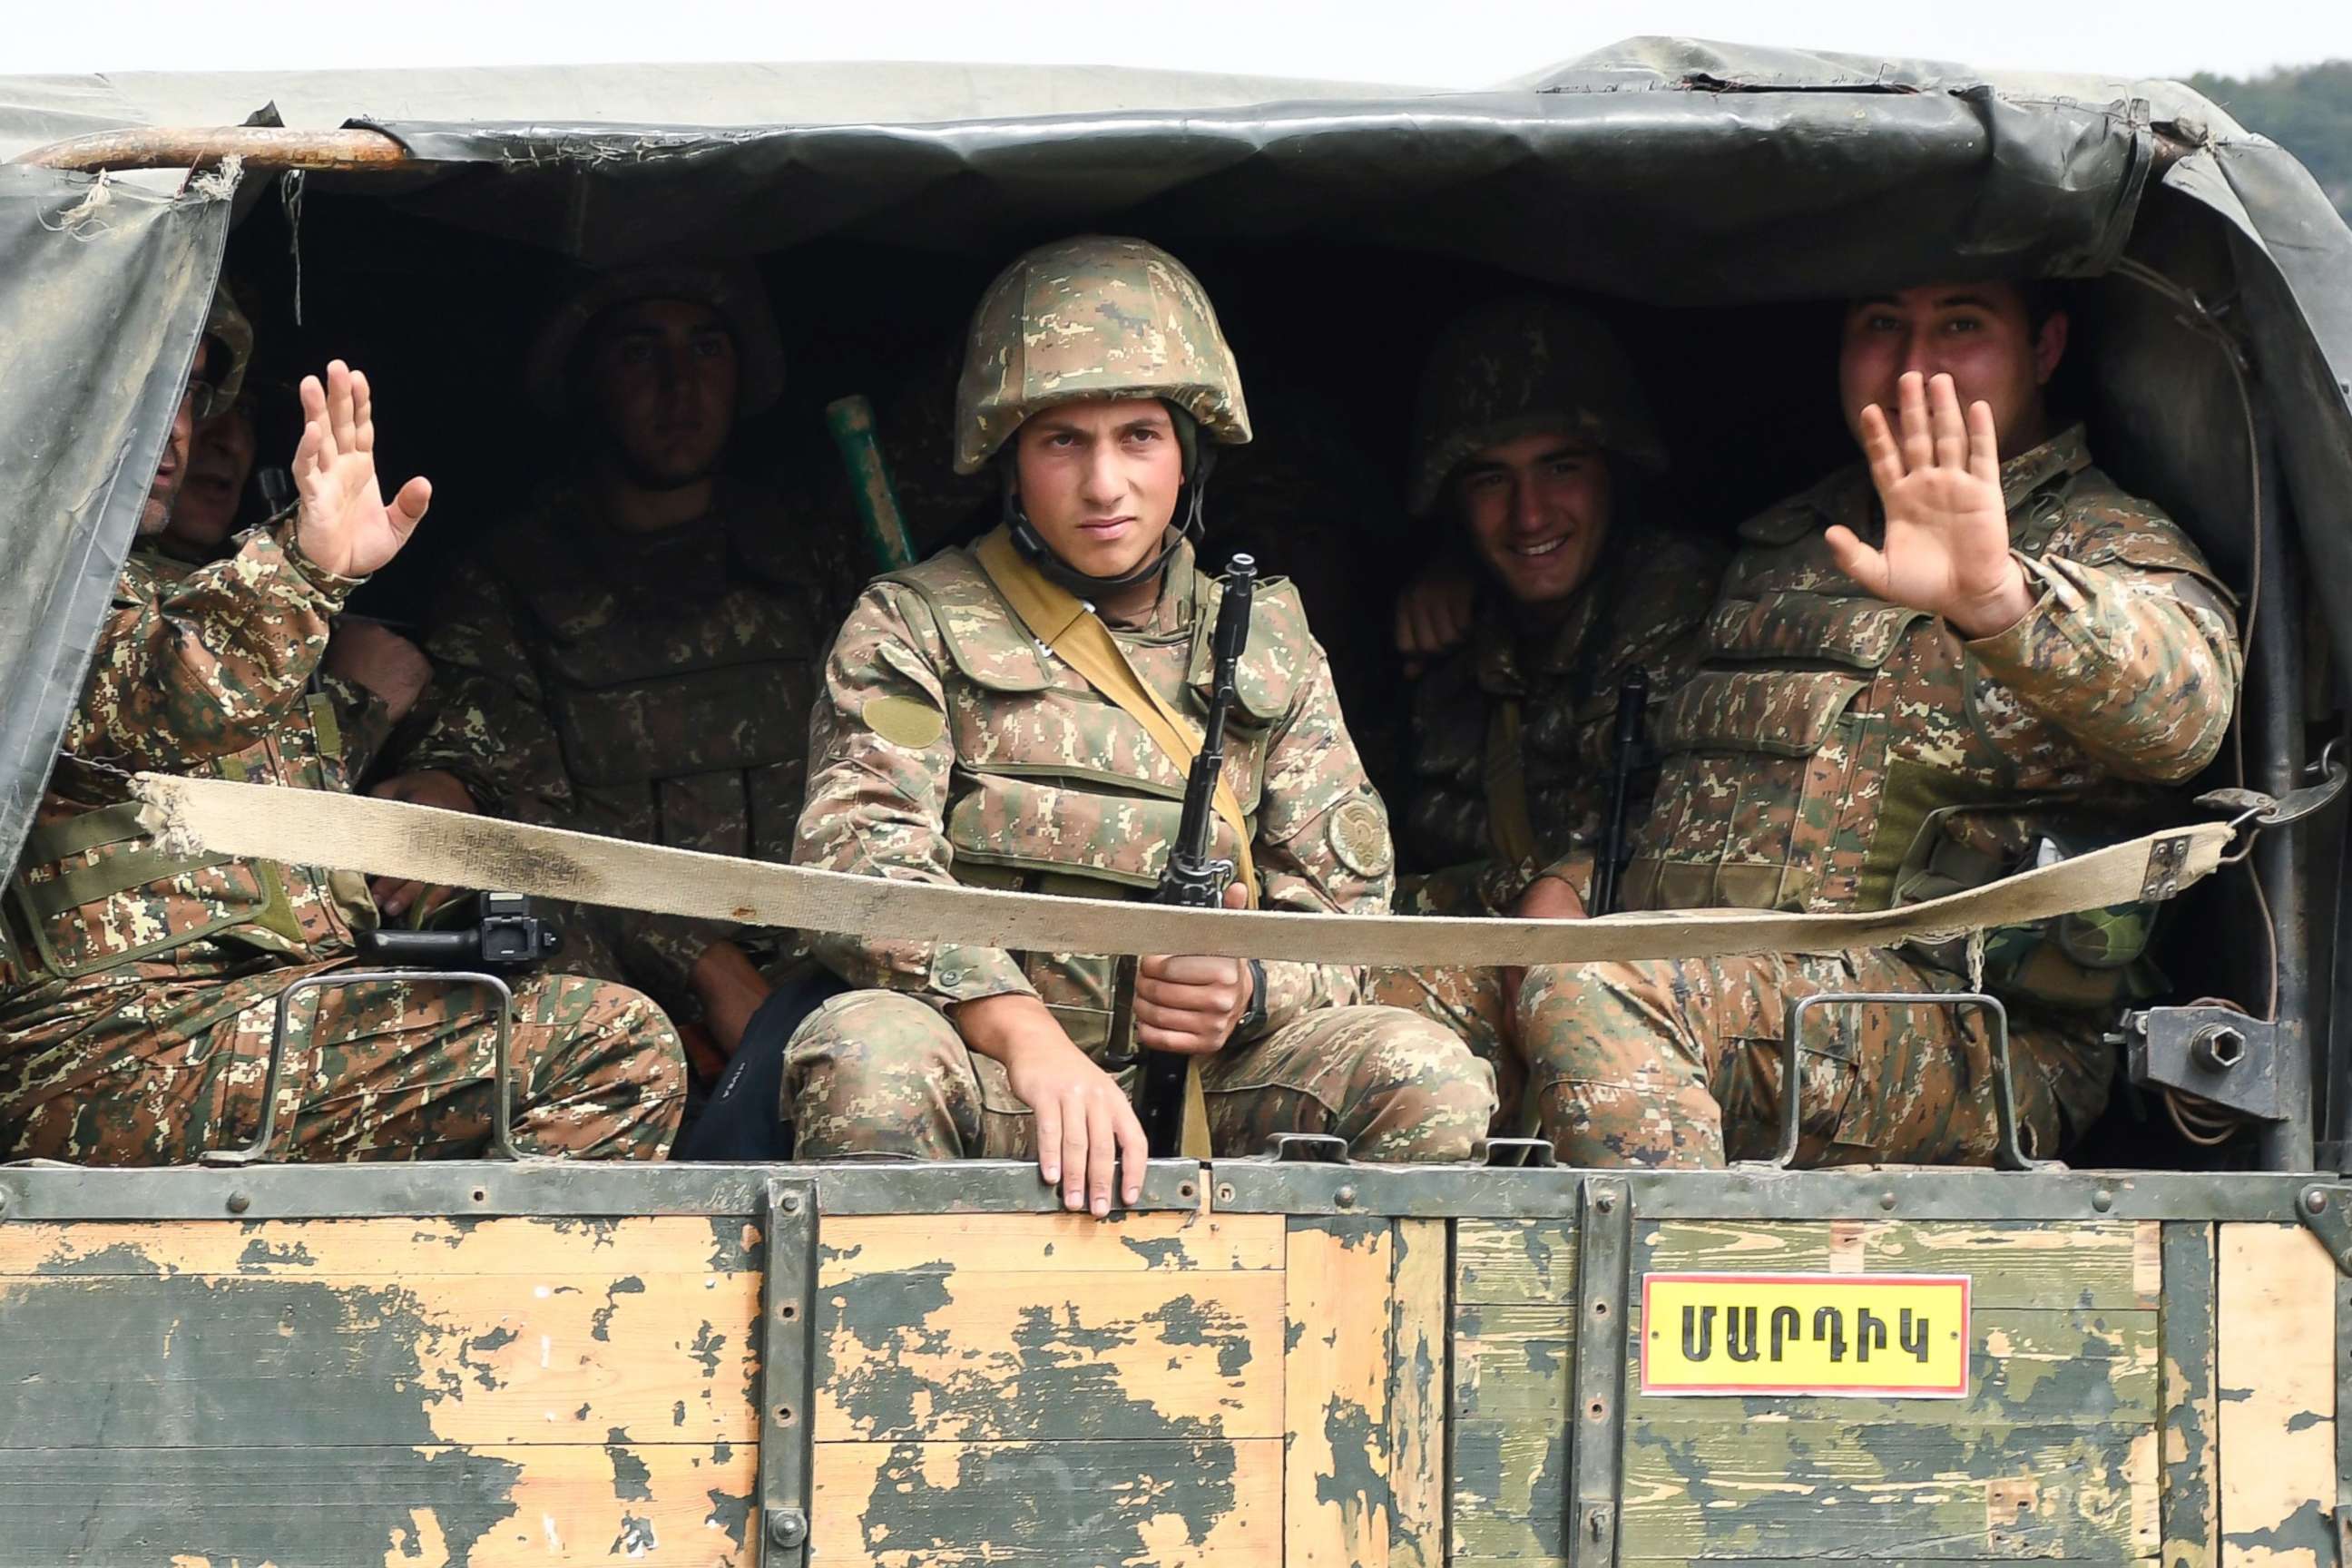 PHOTO: Servicemen of Karabakh's Defence Army wave while riding in the back of a truck on the way to the town of Martakert during fighting with Azerbaijan over the breakaway Nagorny Karabakh region, Sept. 29, 2020. 